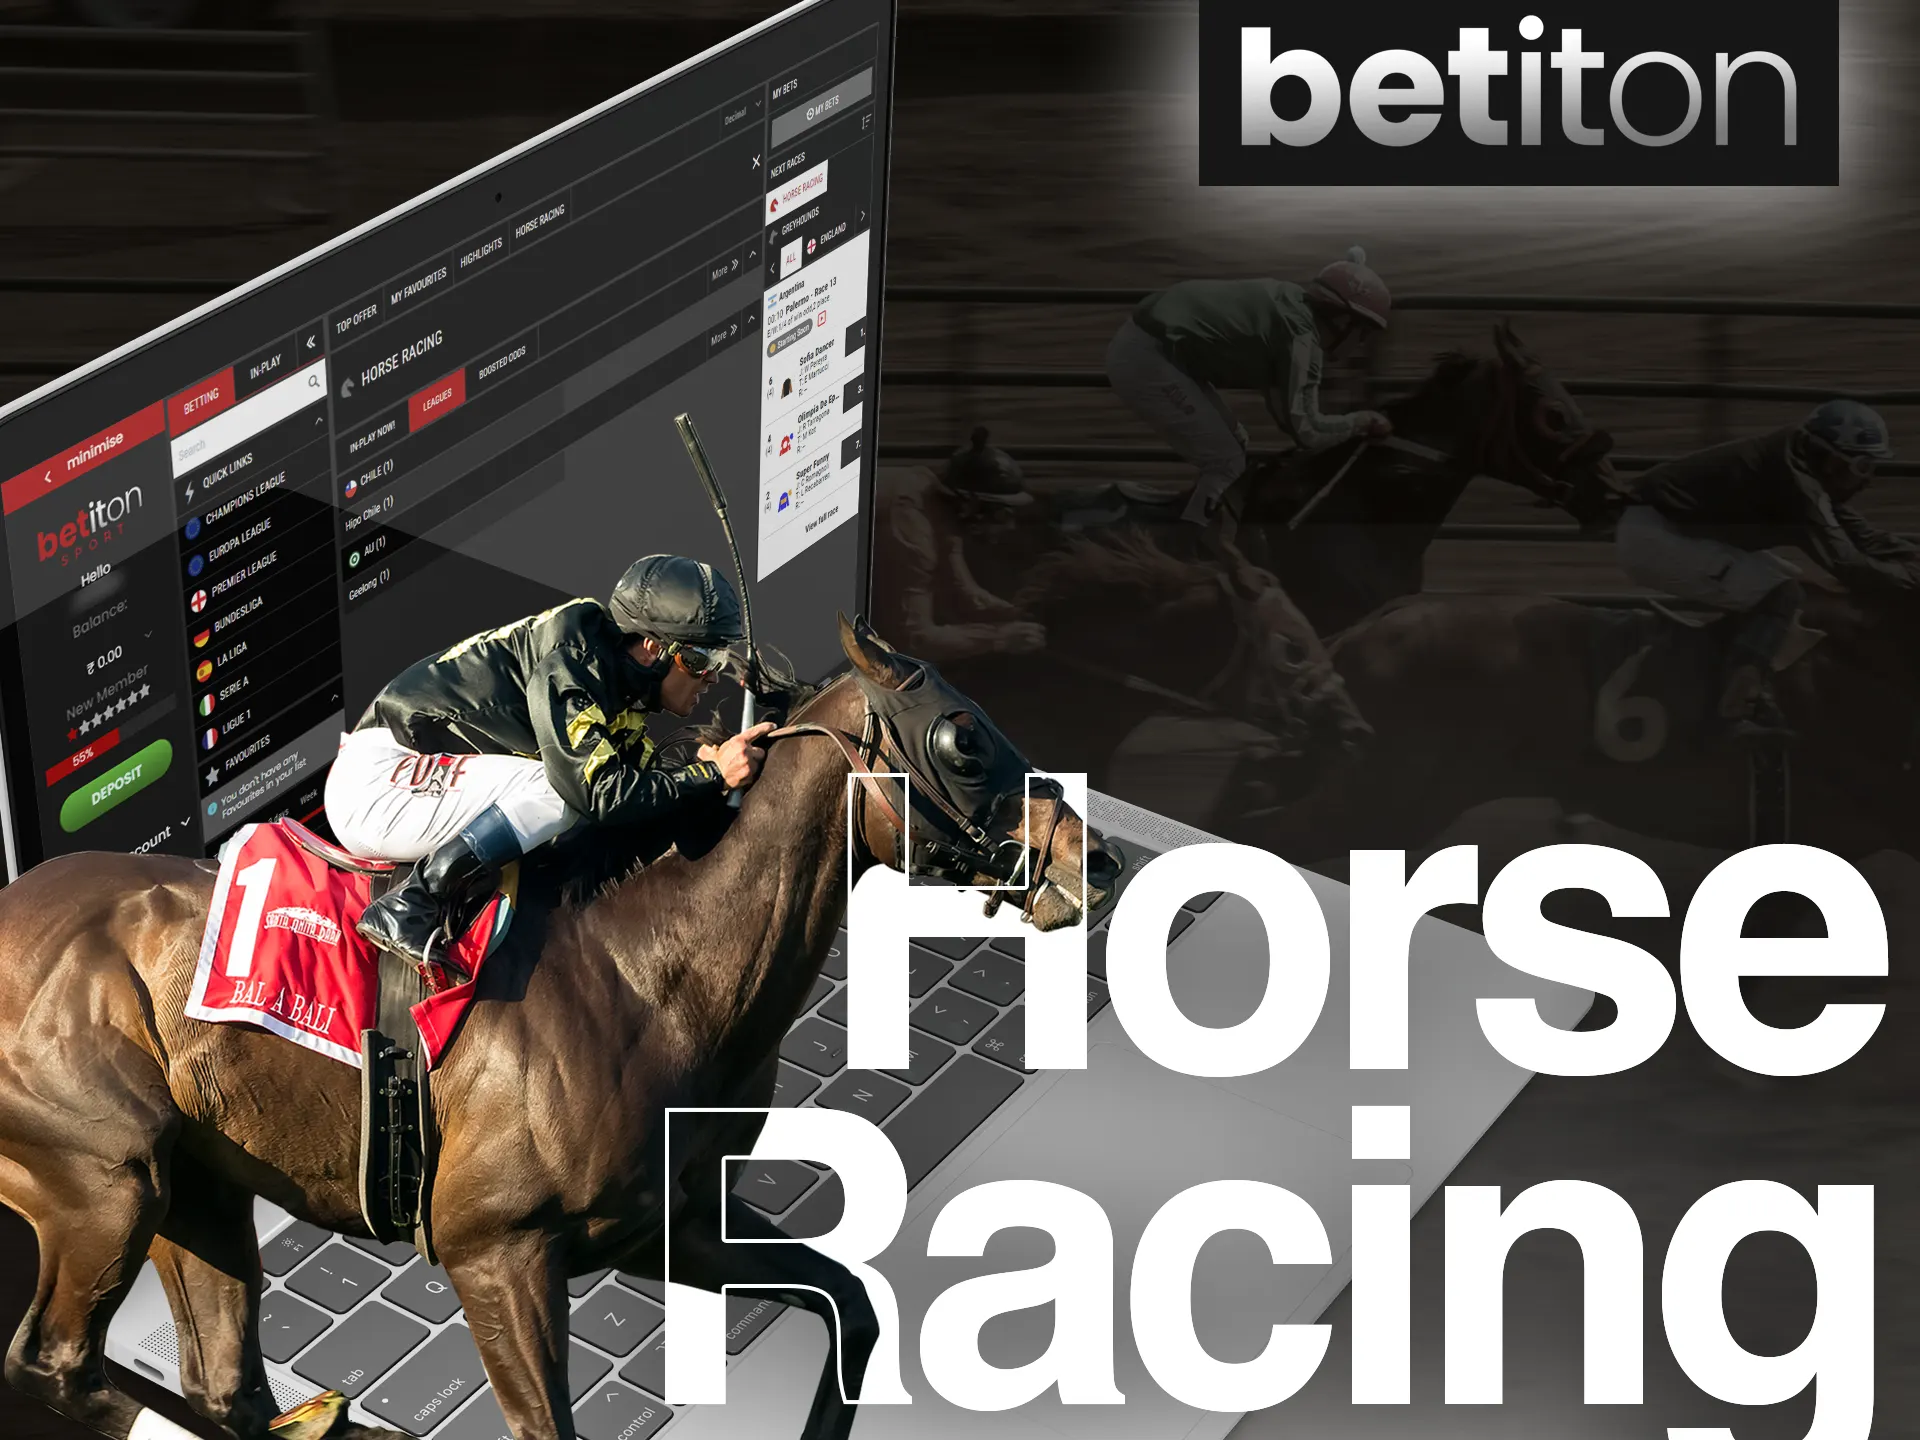 Win money by placing a bet on the fastest horse at the Betiton.